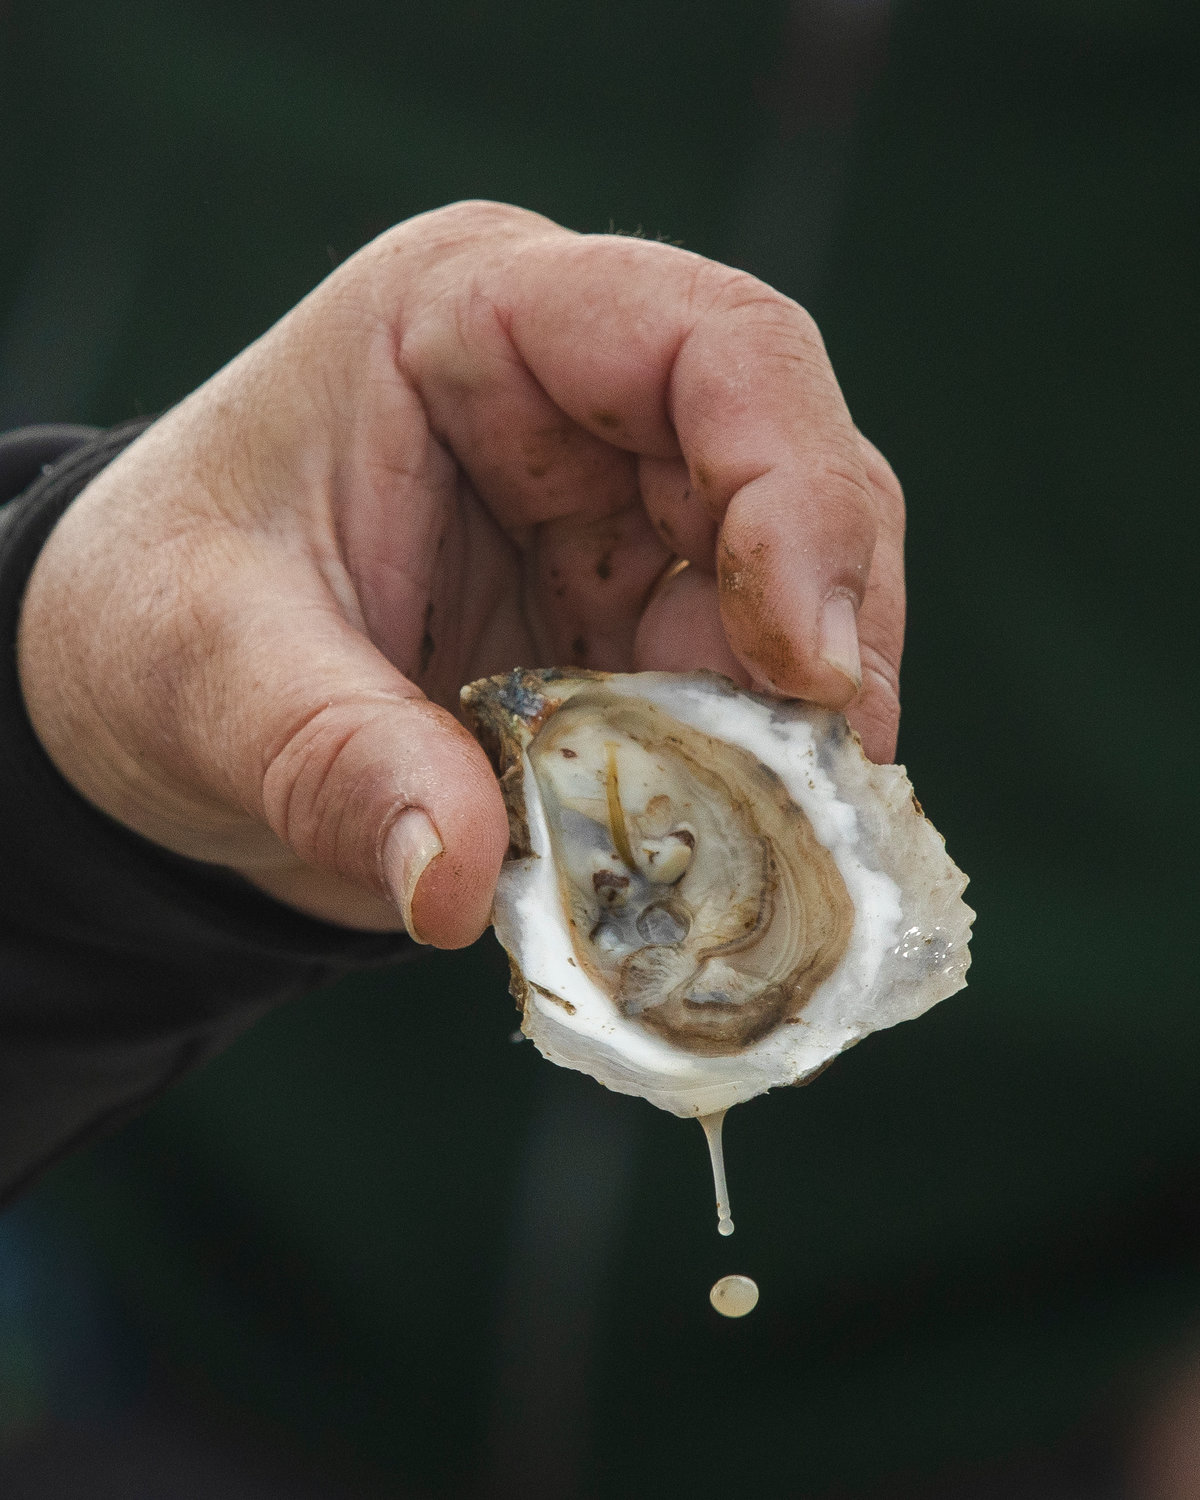 Navy Cove Oysters are characterized by an umami of moderate brine, a rich, creamy, buttery texture and sweet, cucumber-like finish.